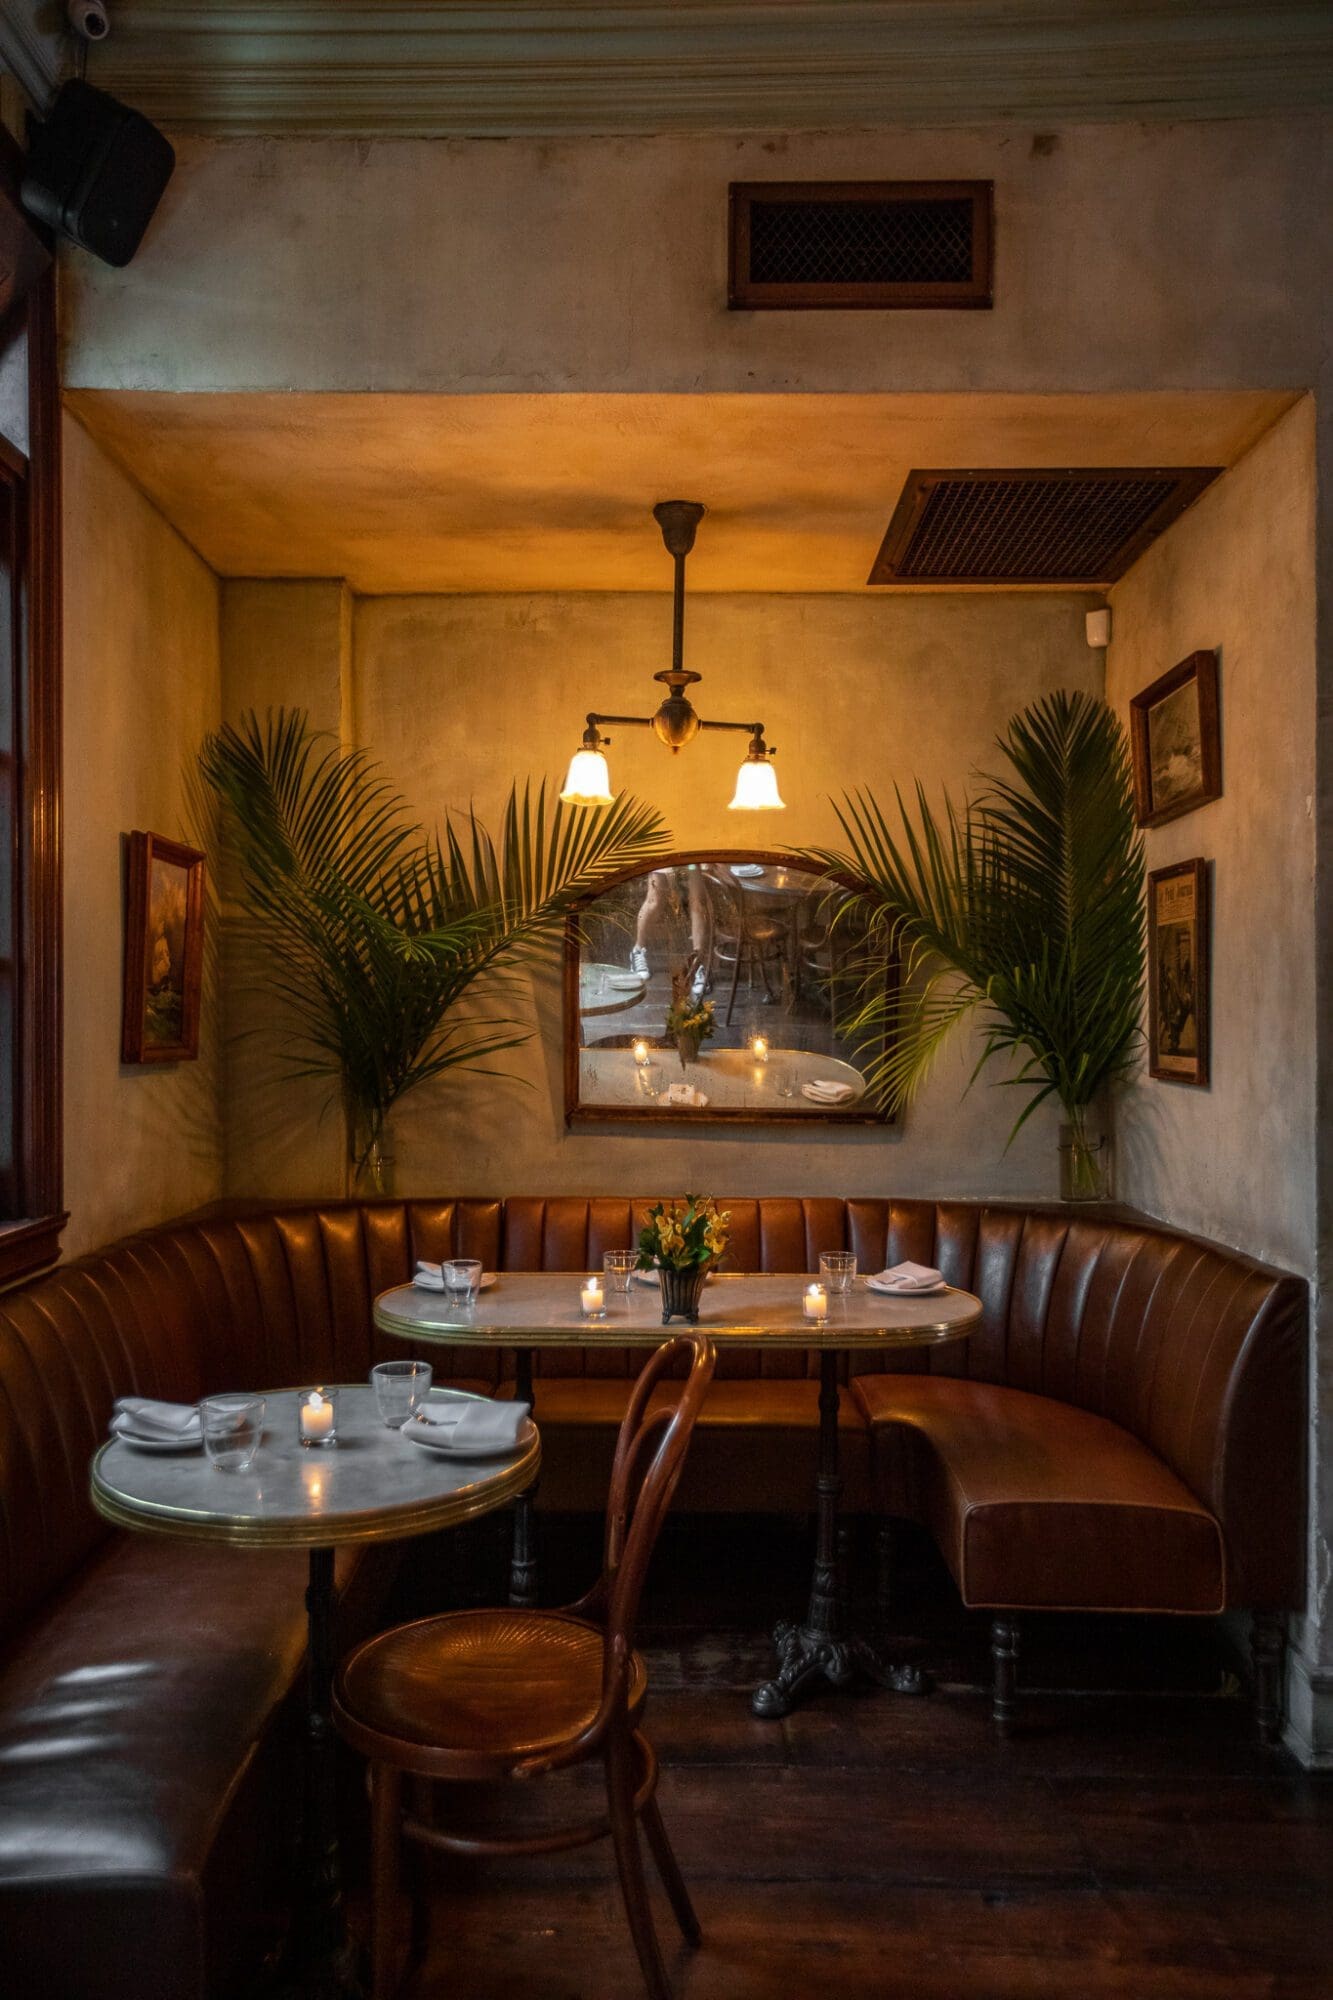 Maison Premiere New Orleans Seafood and Oyster BAR Restaurant in Williamsburg Brooklyn (Interiors)